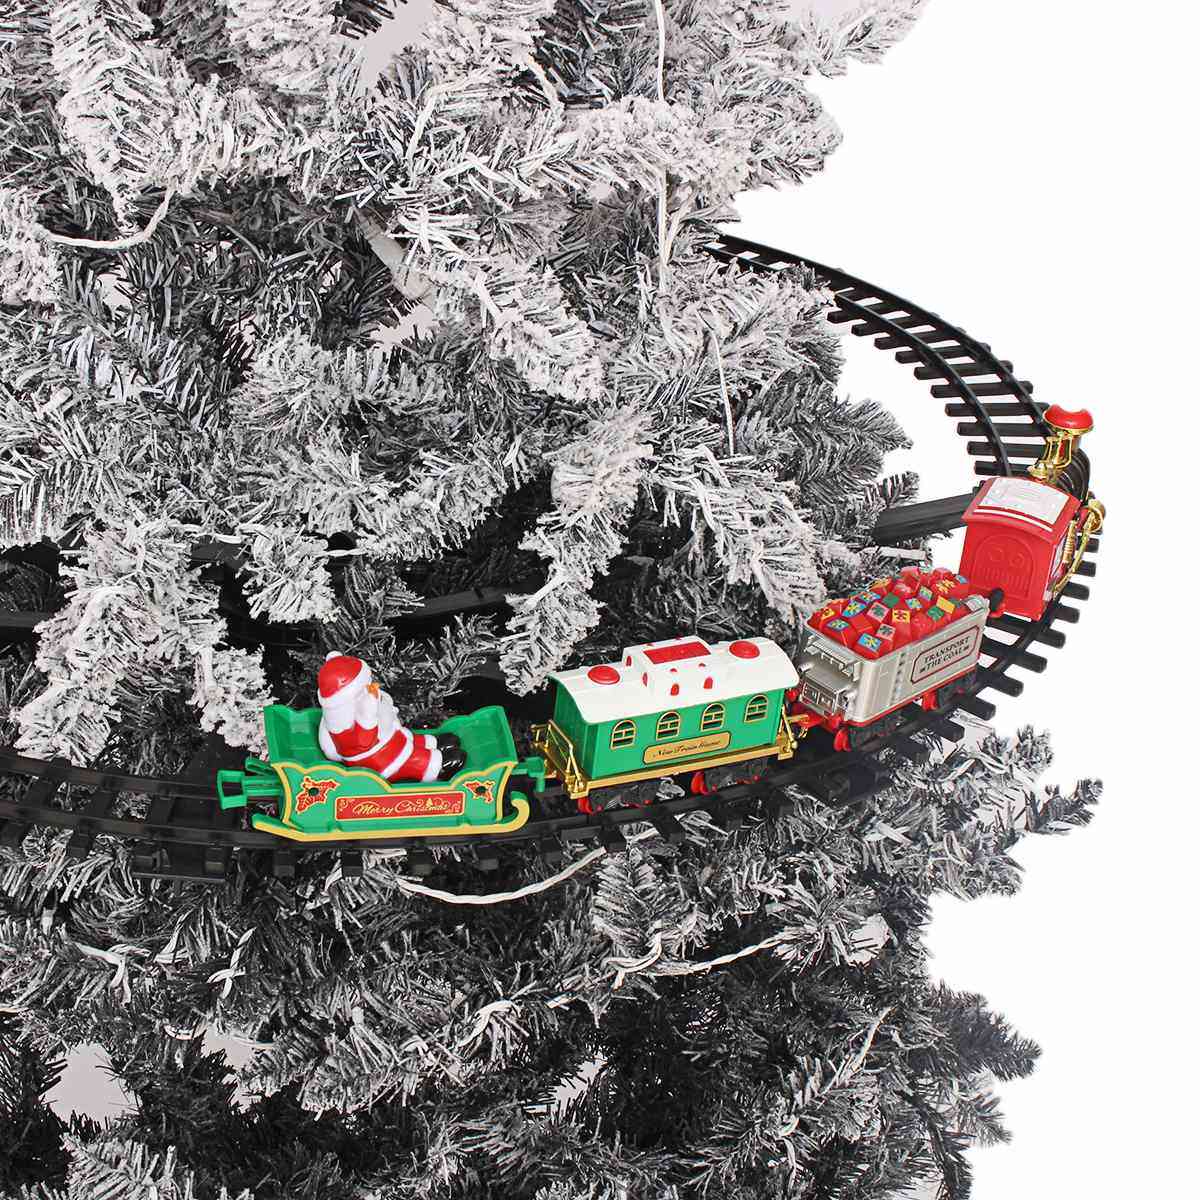 Electric Railway Can Be Installed On The Christmas Tree With Lights